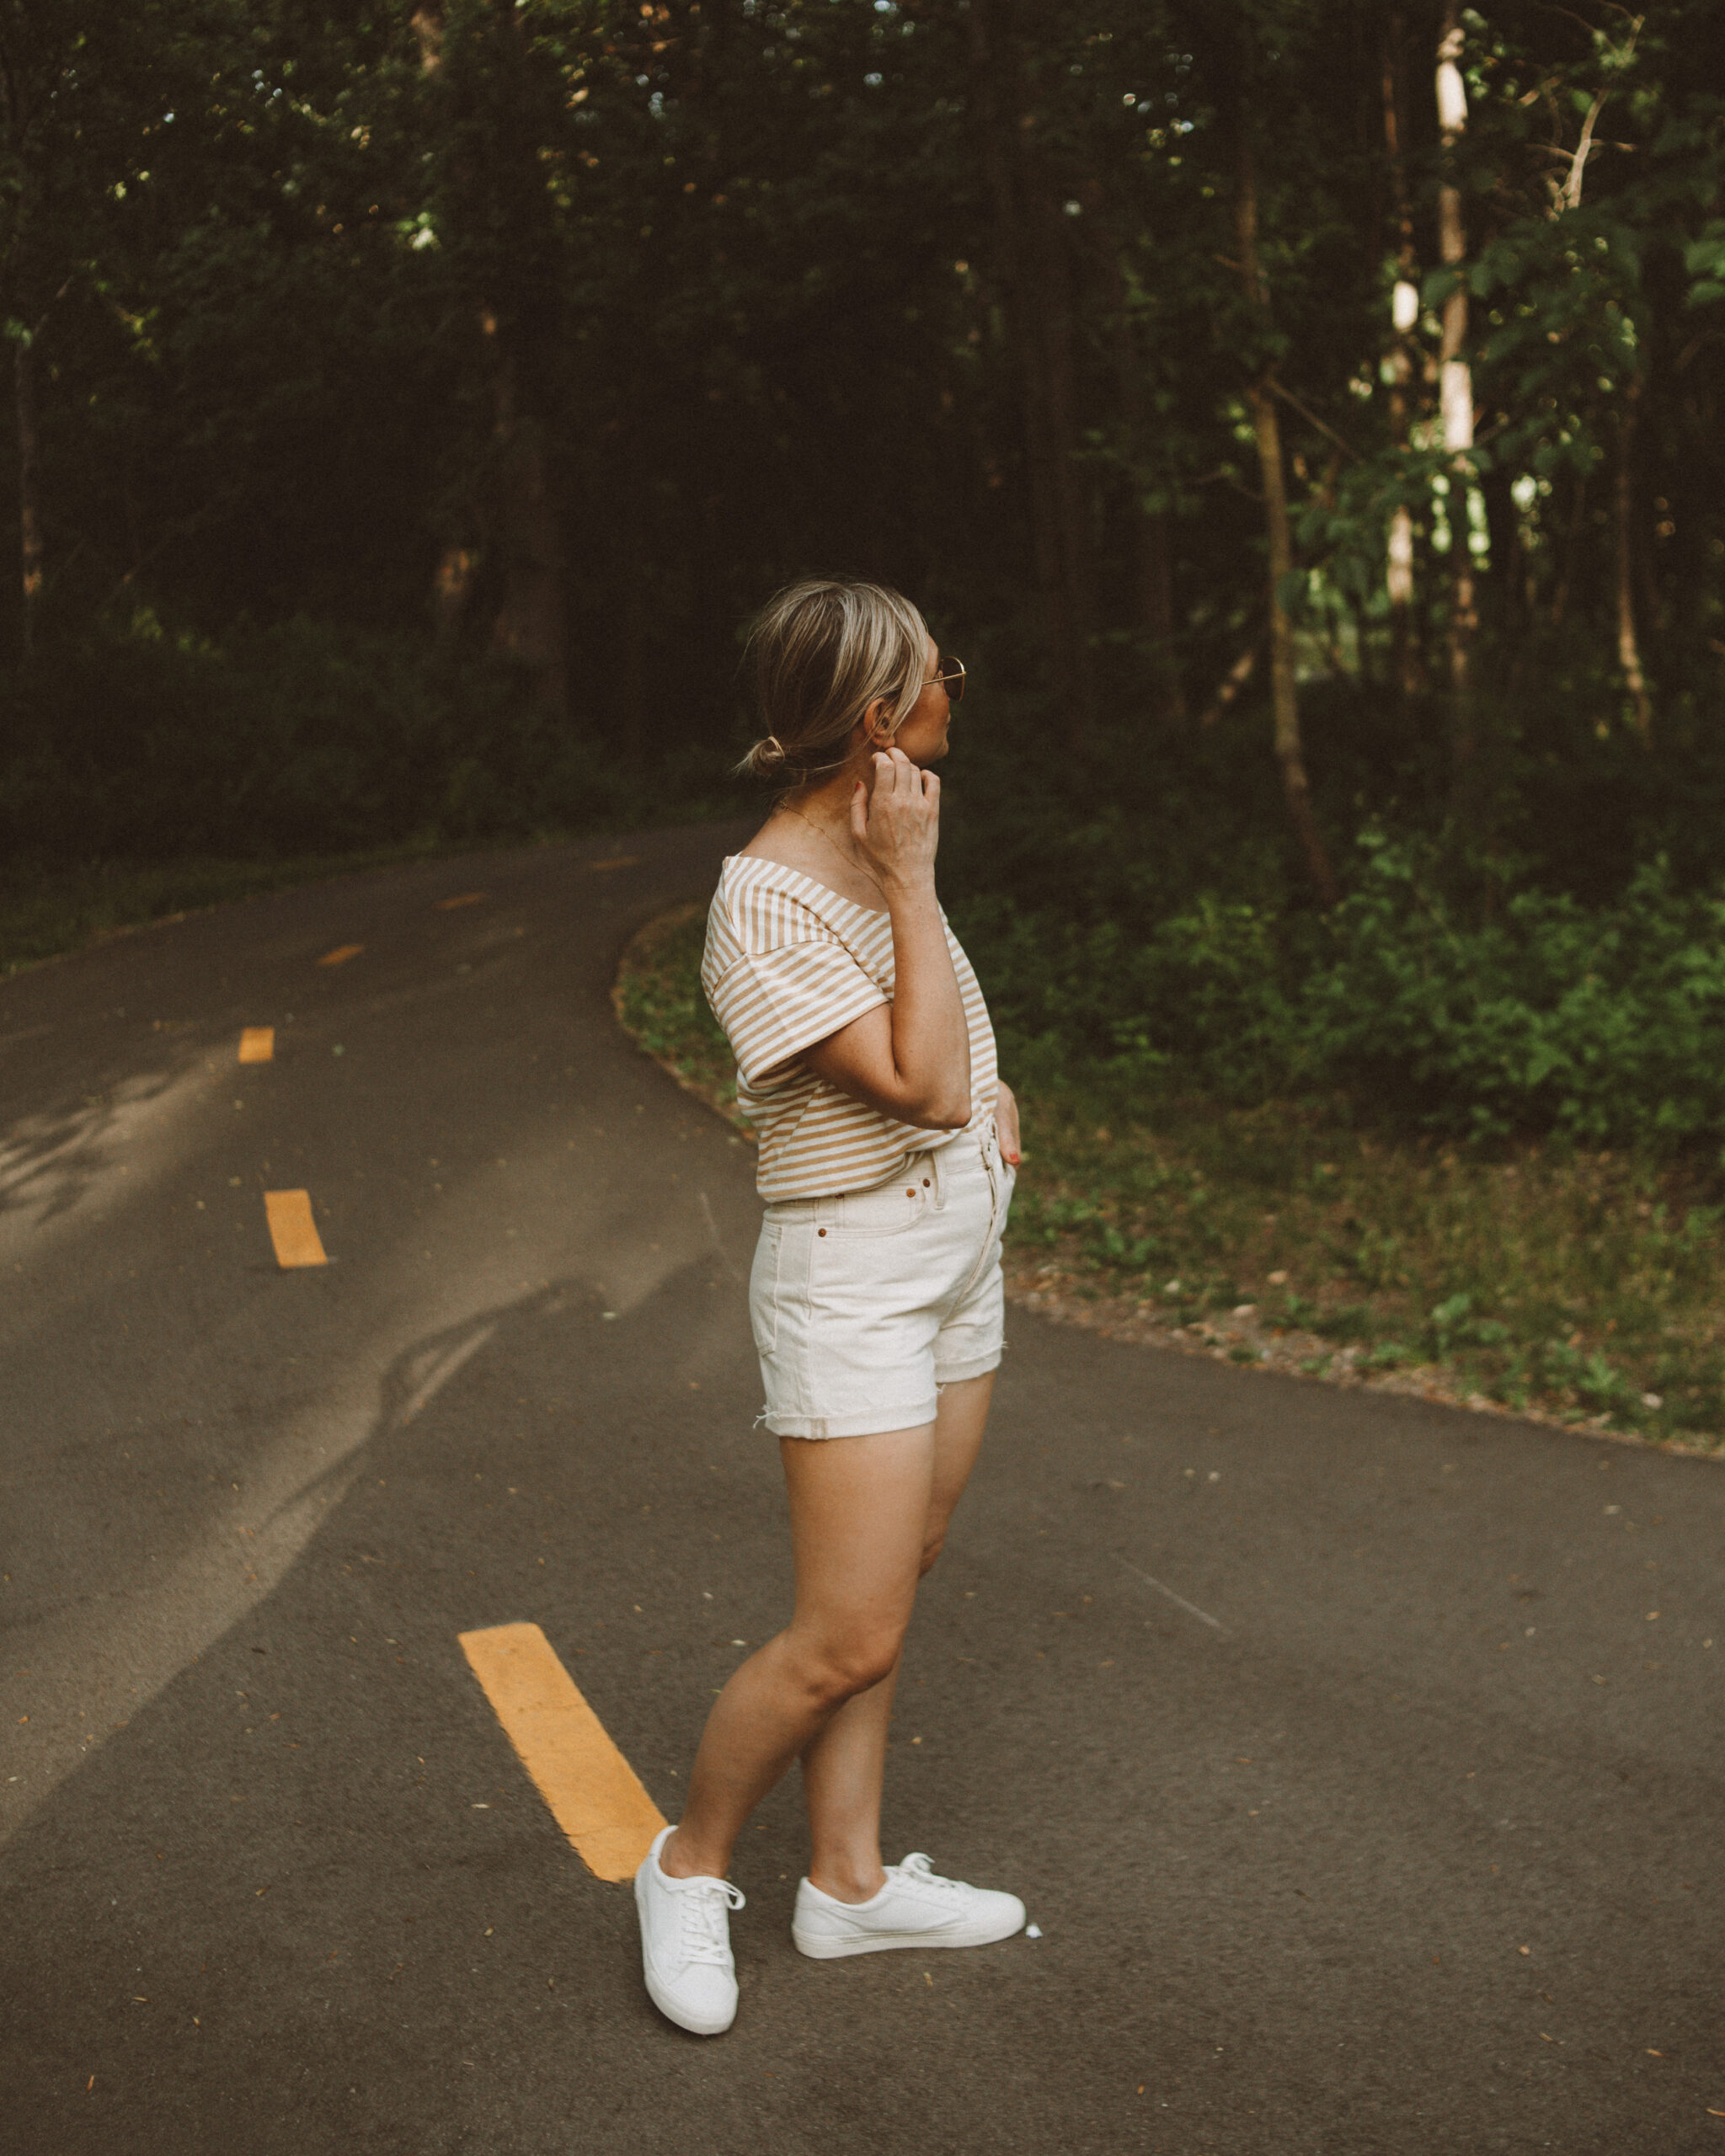 Karin Emily wears a striped tee, white sneakers, and cream jean shorts